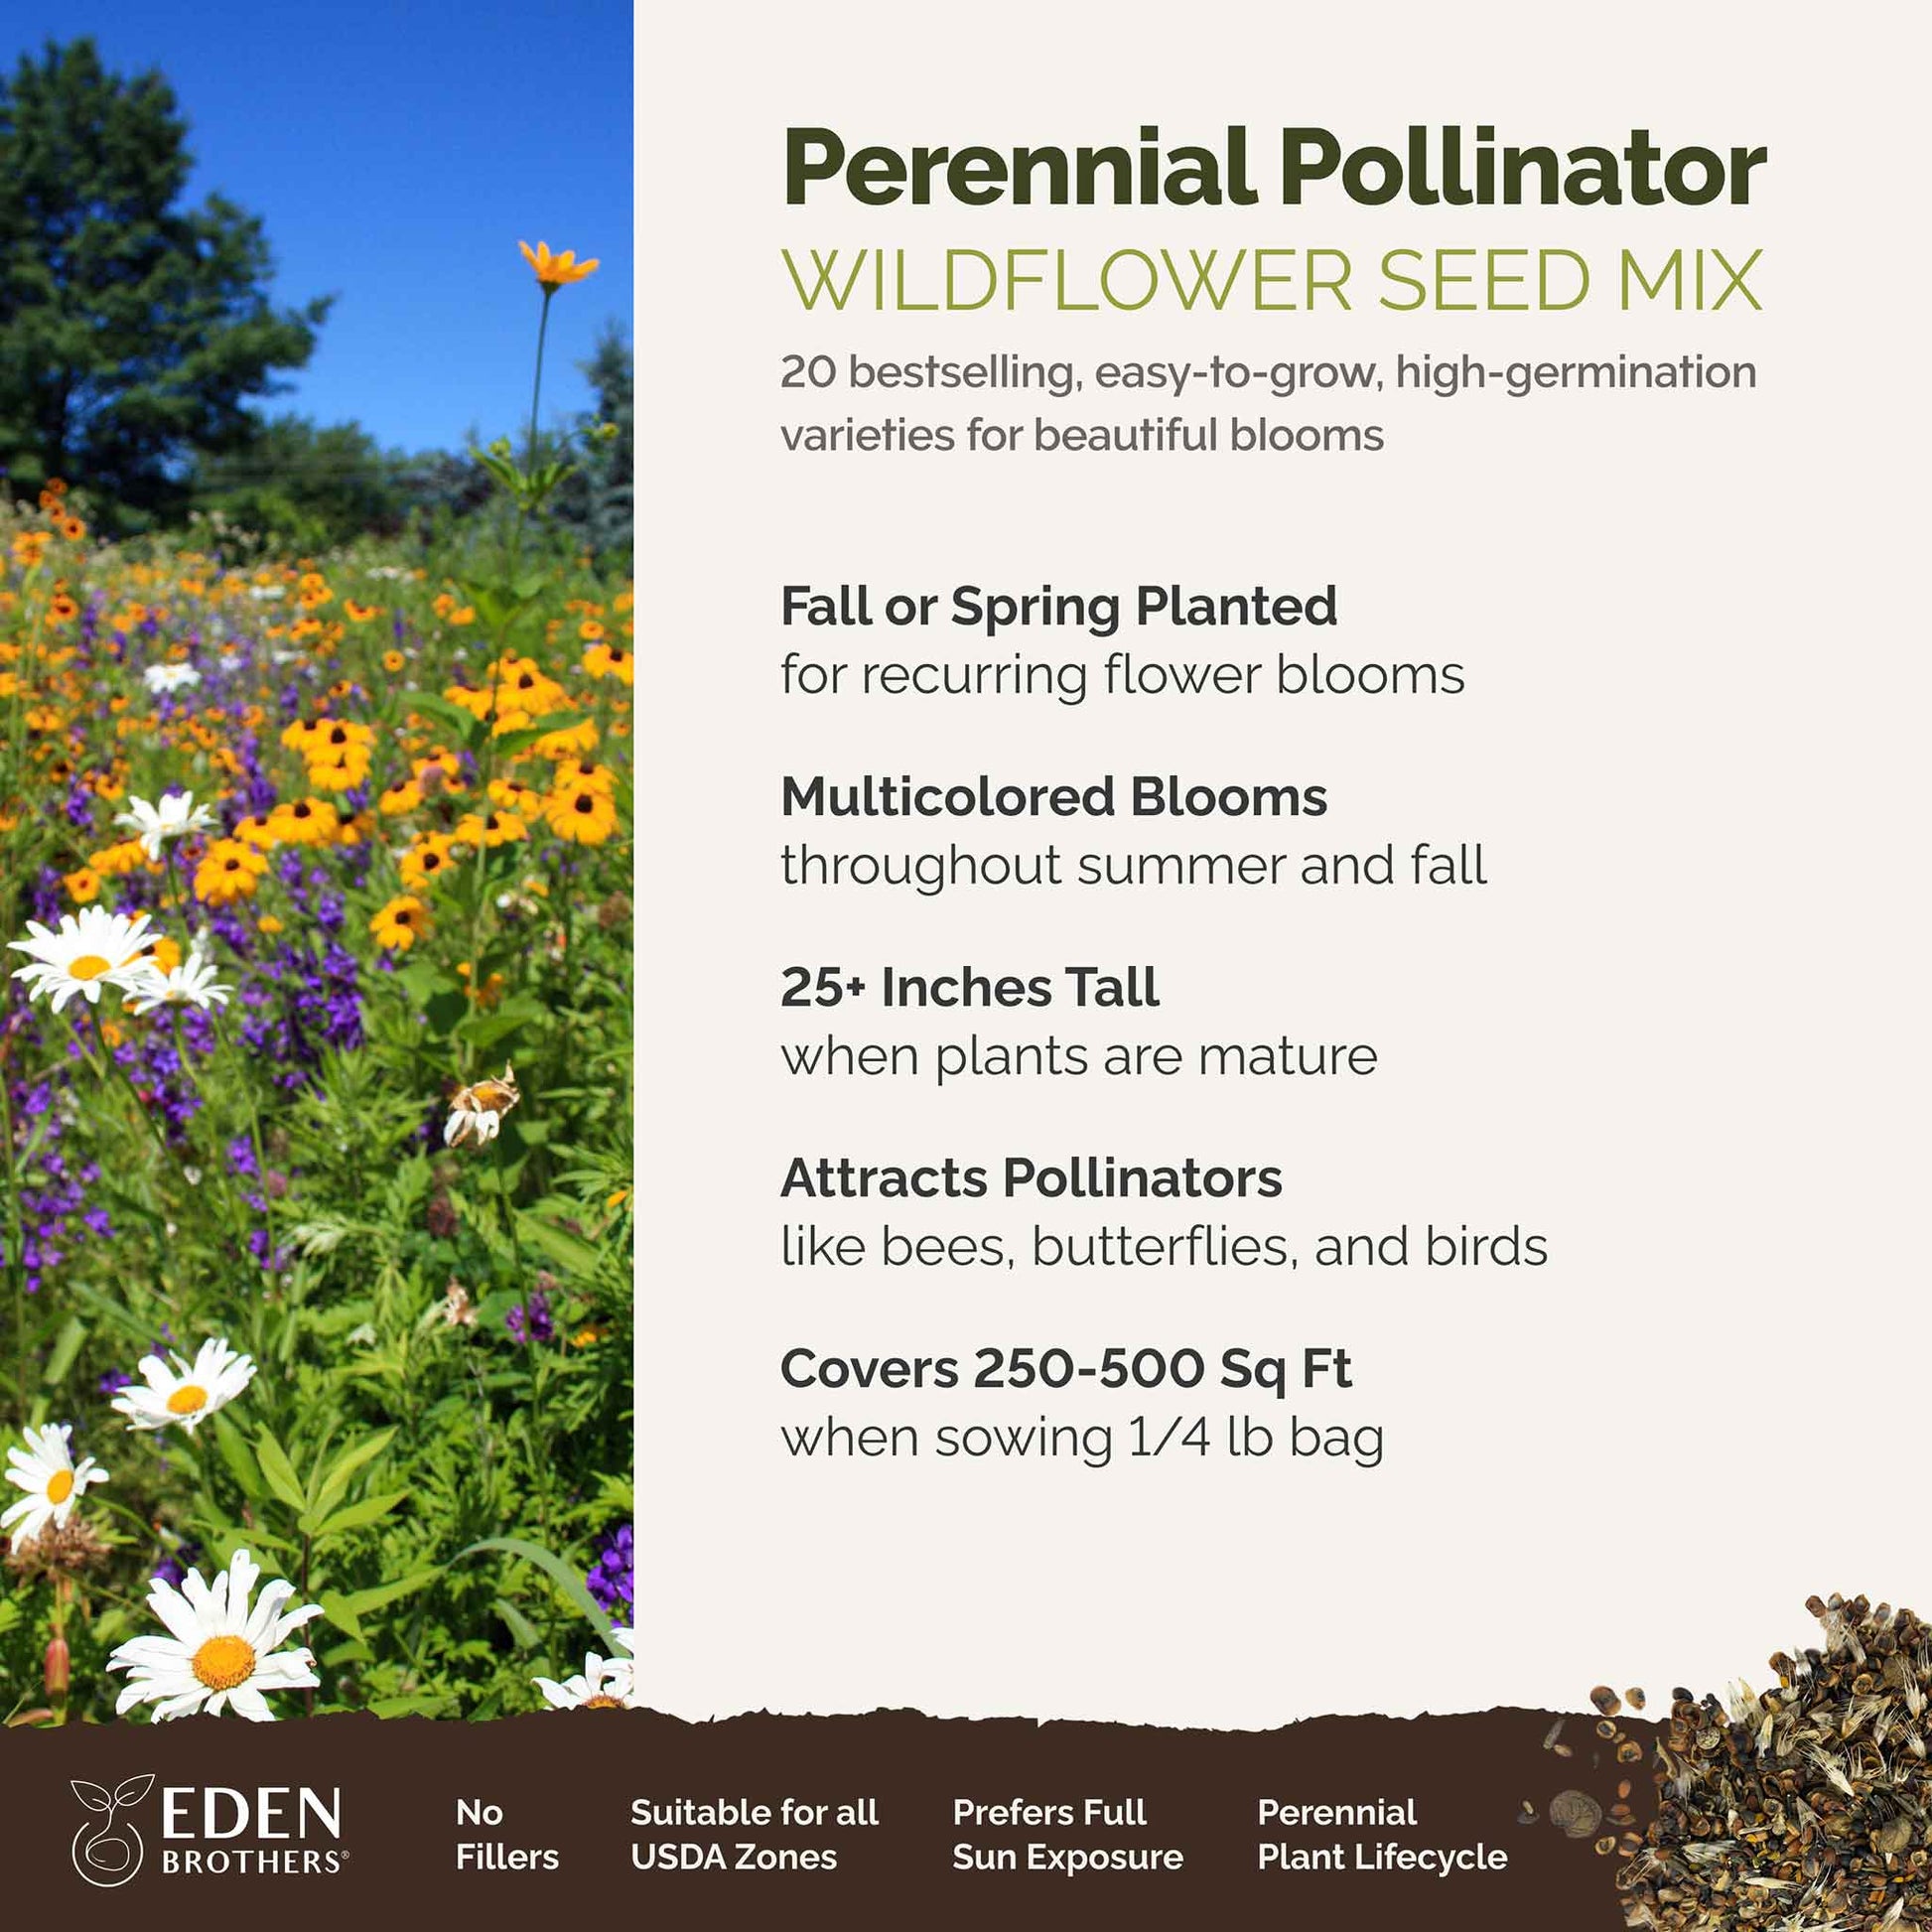 perennial pollinator overview